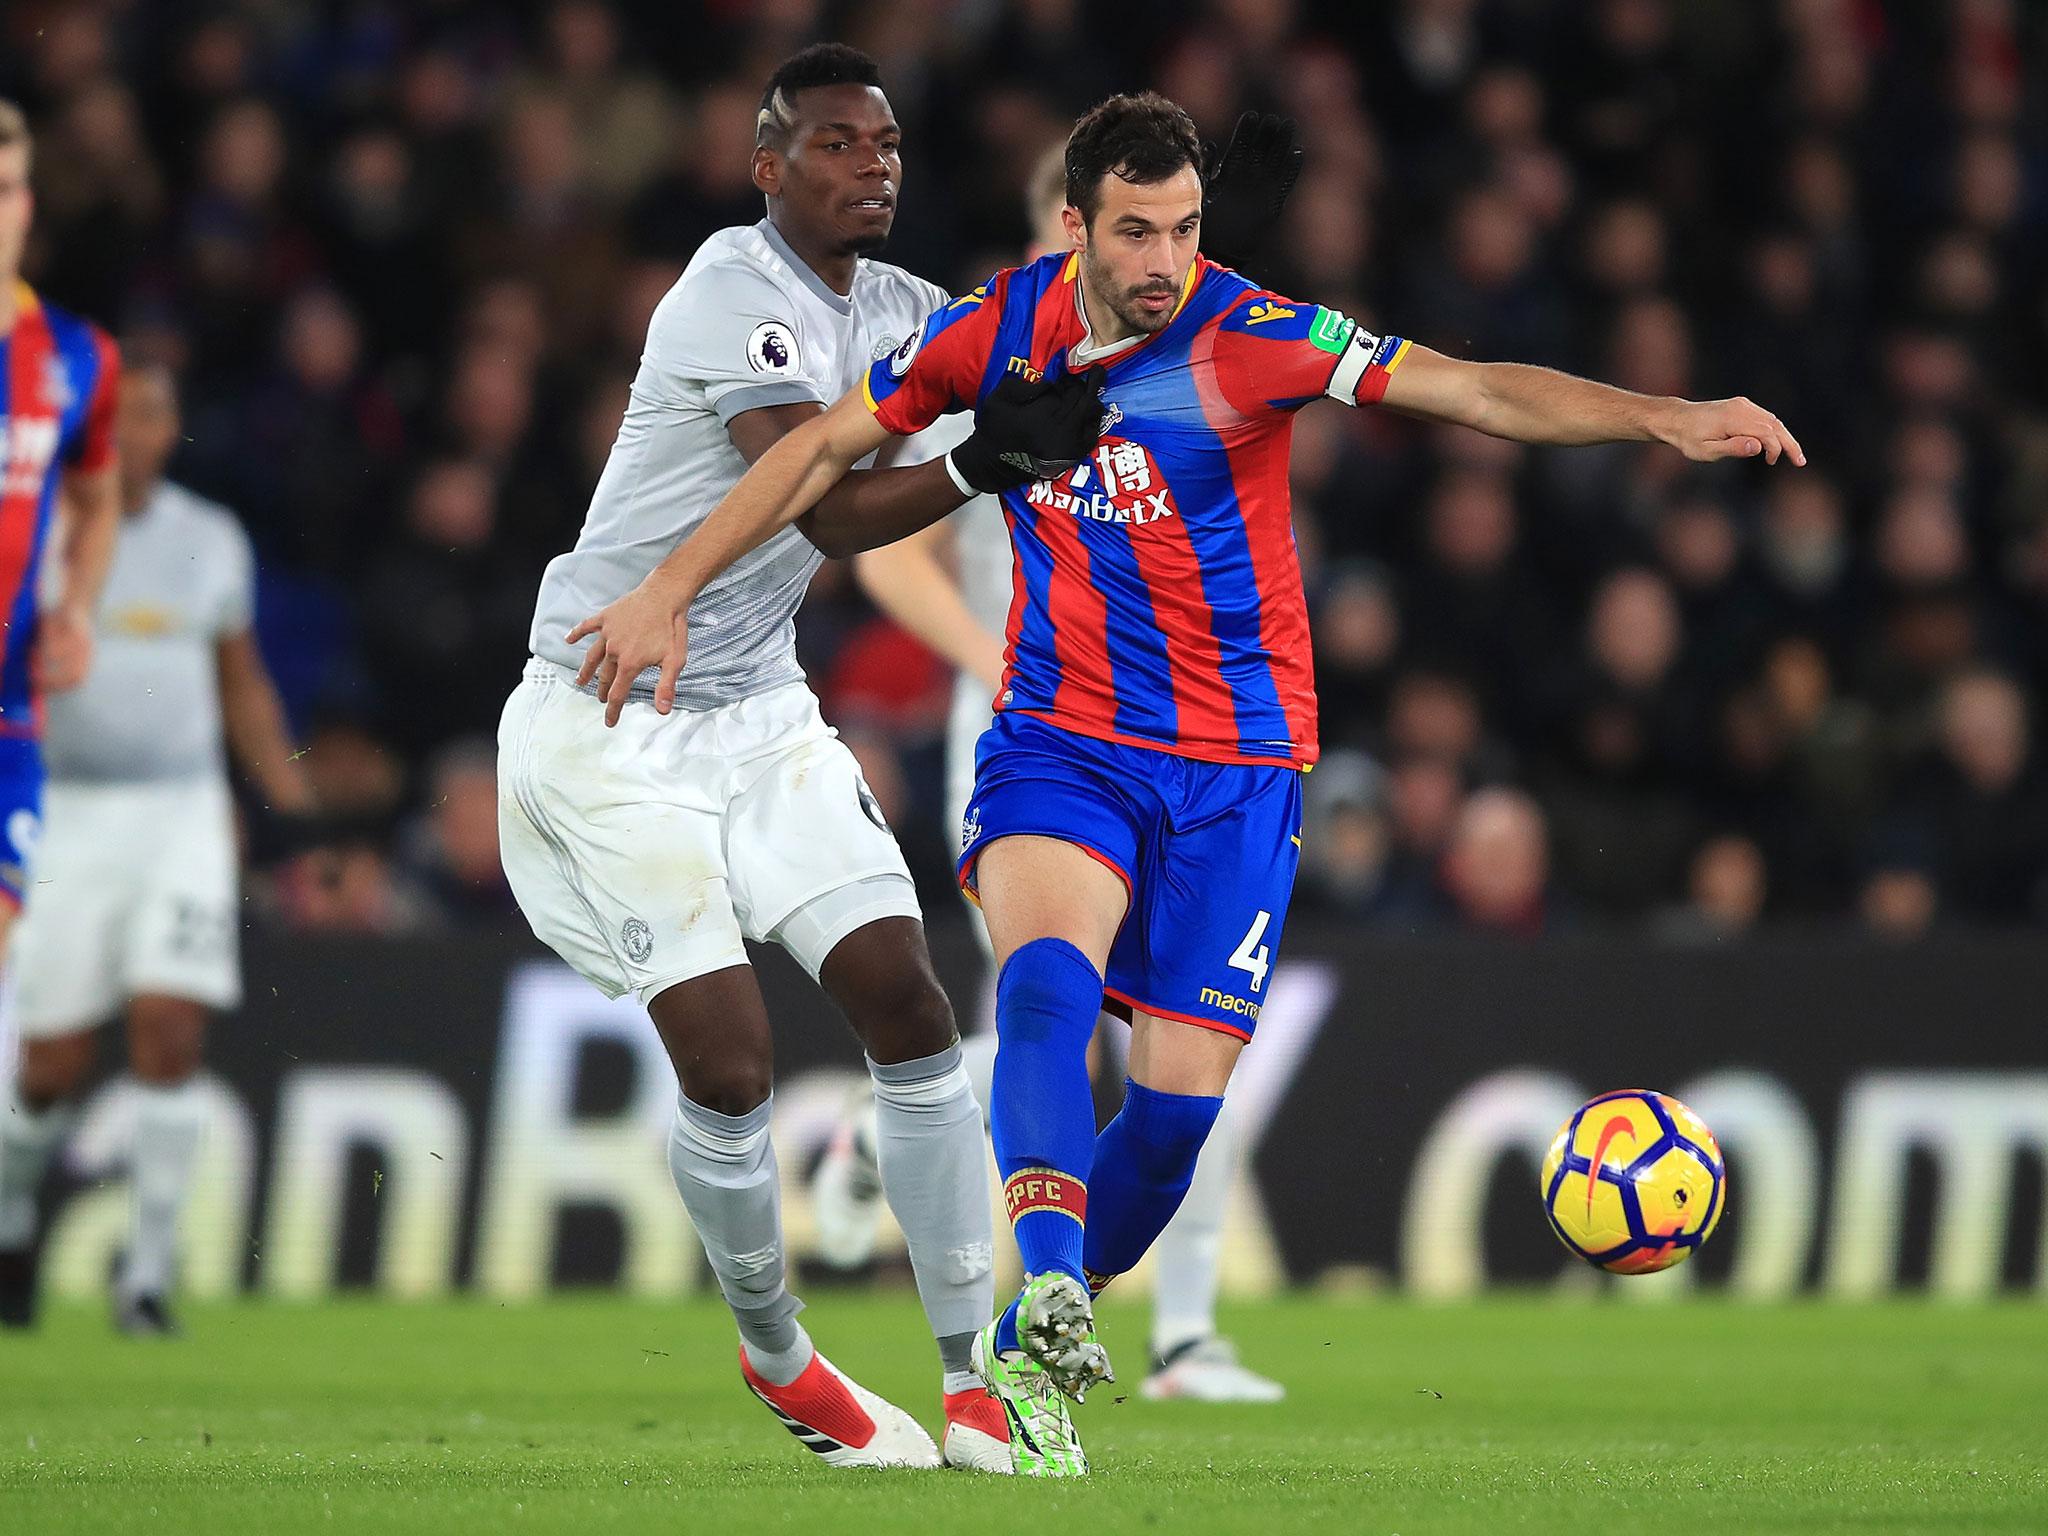 Paul Pogba tussles for possession with Luka Milivojevic